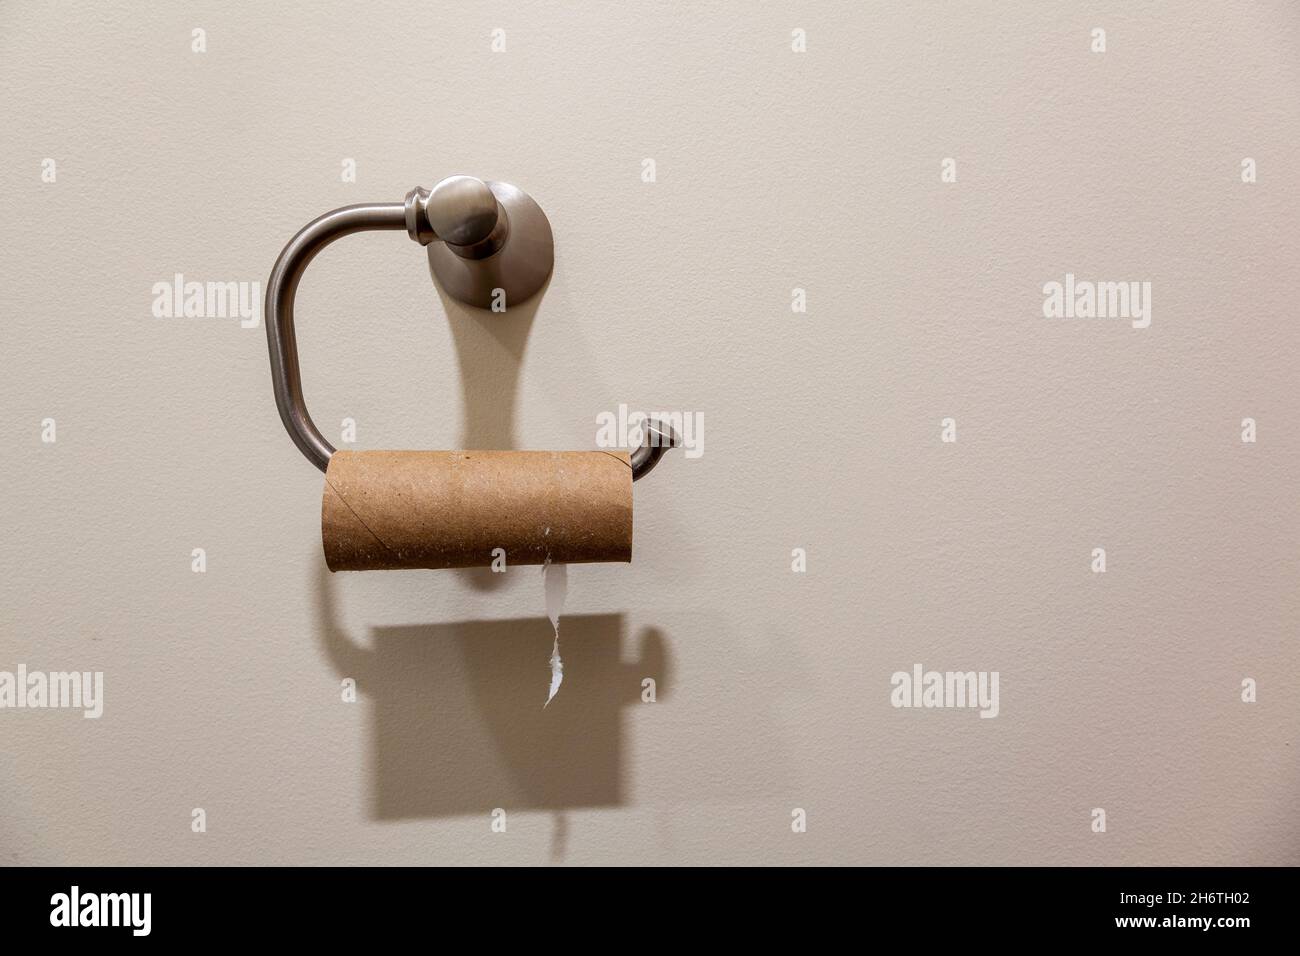 Concept image showing a toilet paper hanger with an empty toilet paper roll hanging on it. Useful image for shortage related to disturbed suply chain Stock Photo